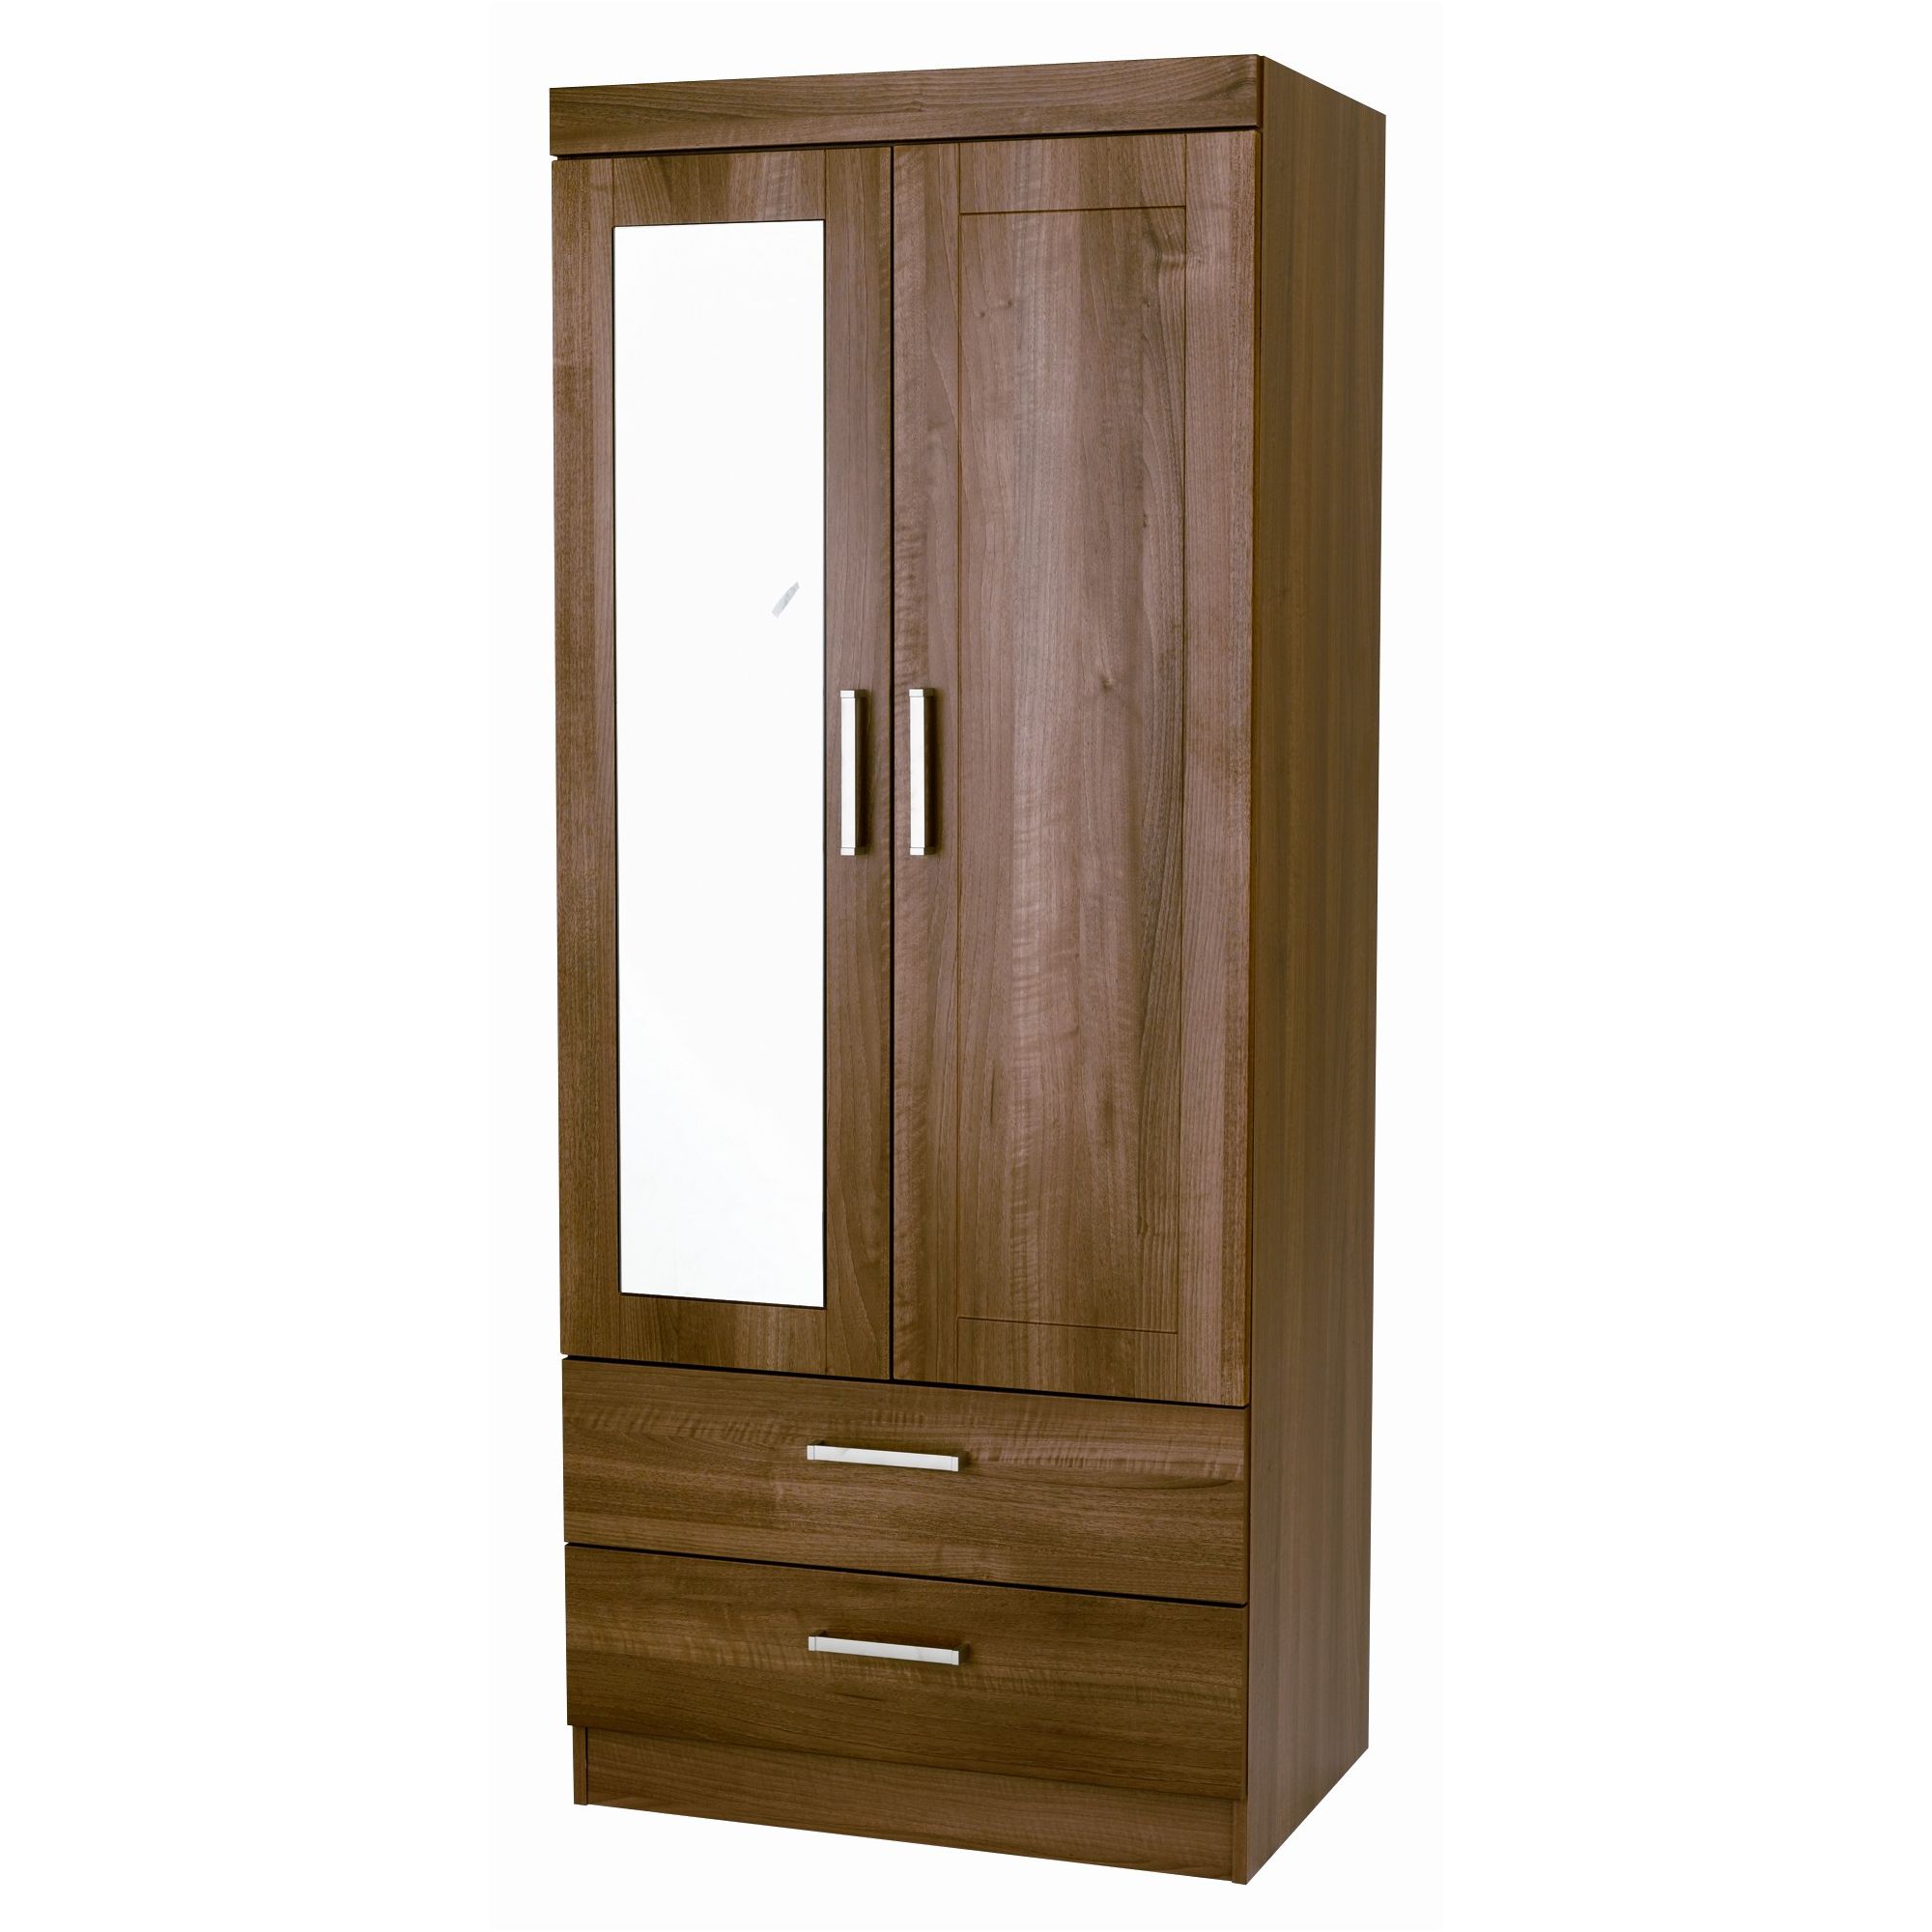 Alto Furniture Visualise Alive Combi Two Drawer Wardrobe in Natural Aida Walnut at Tesco Direct